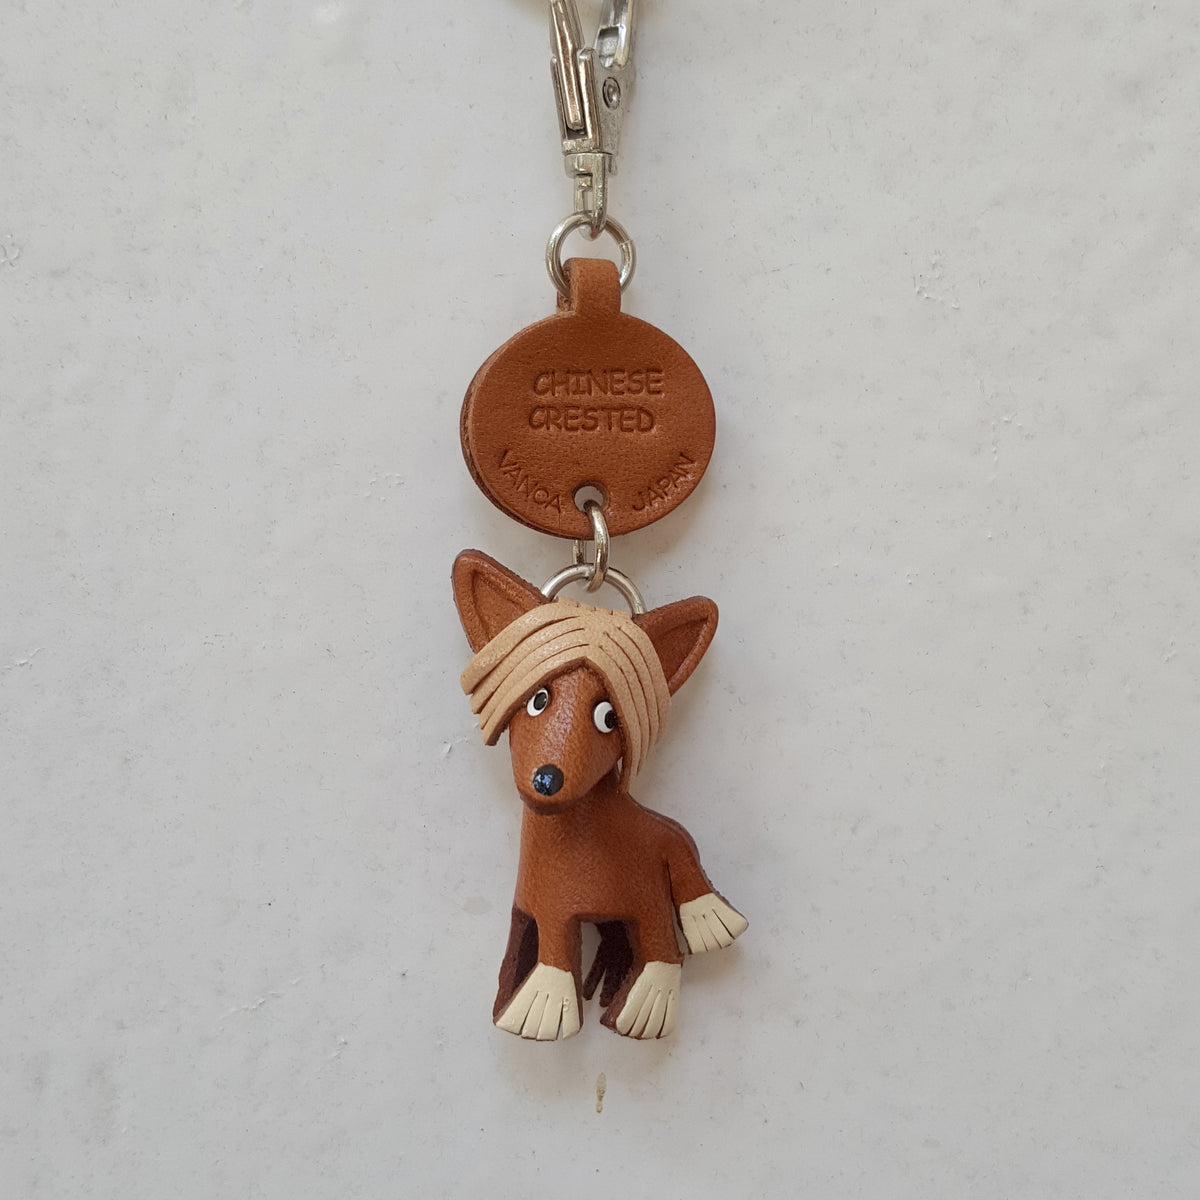 CHINESE CRESTED KEYCHAIN